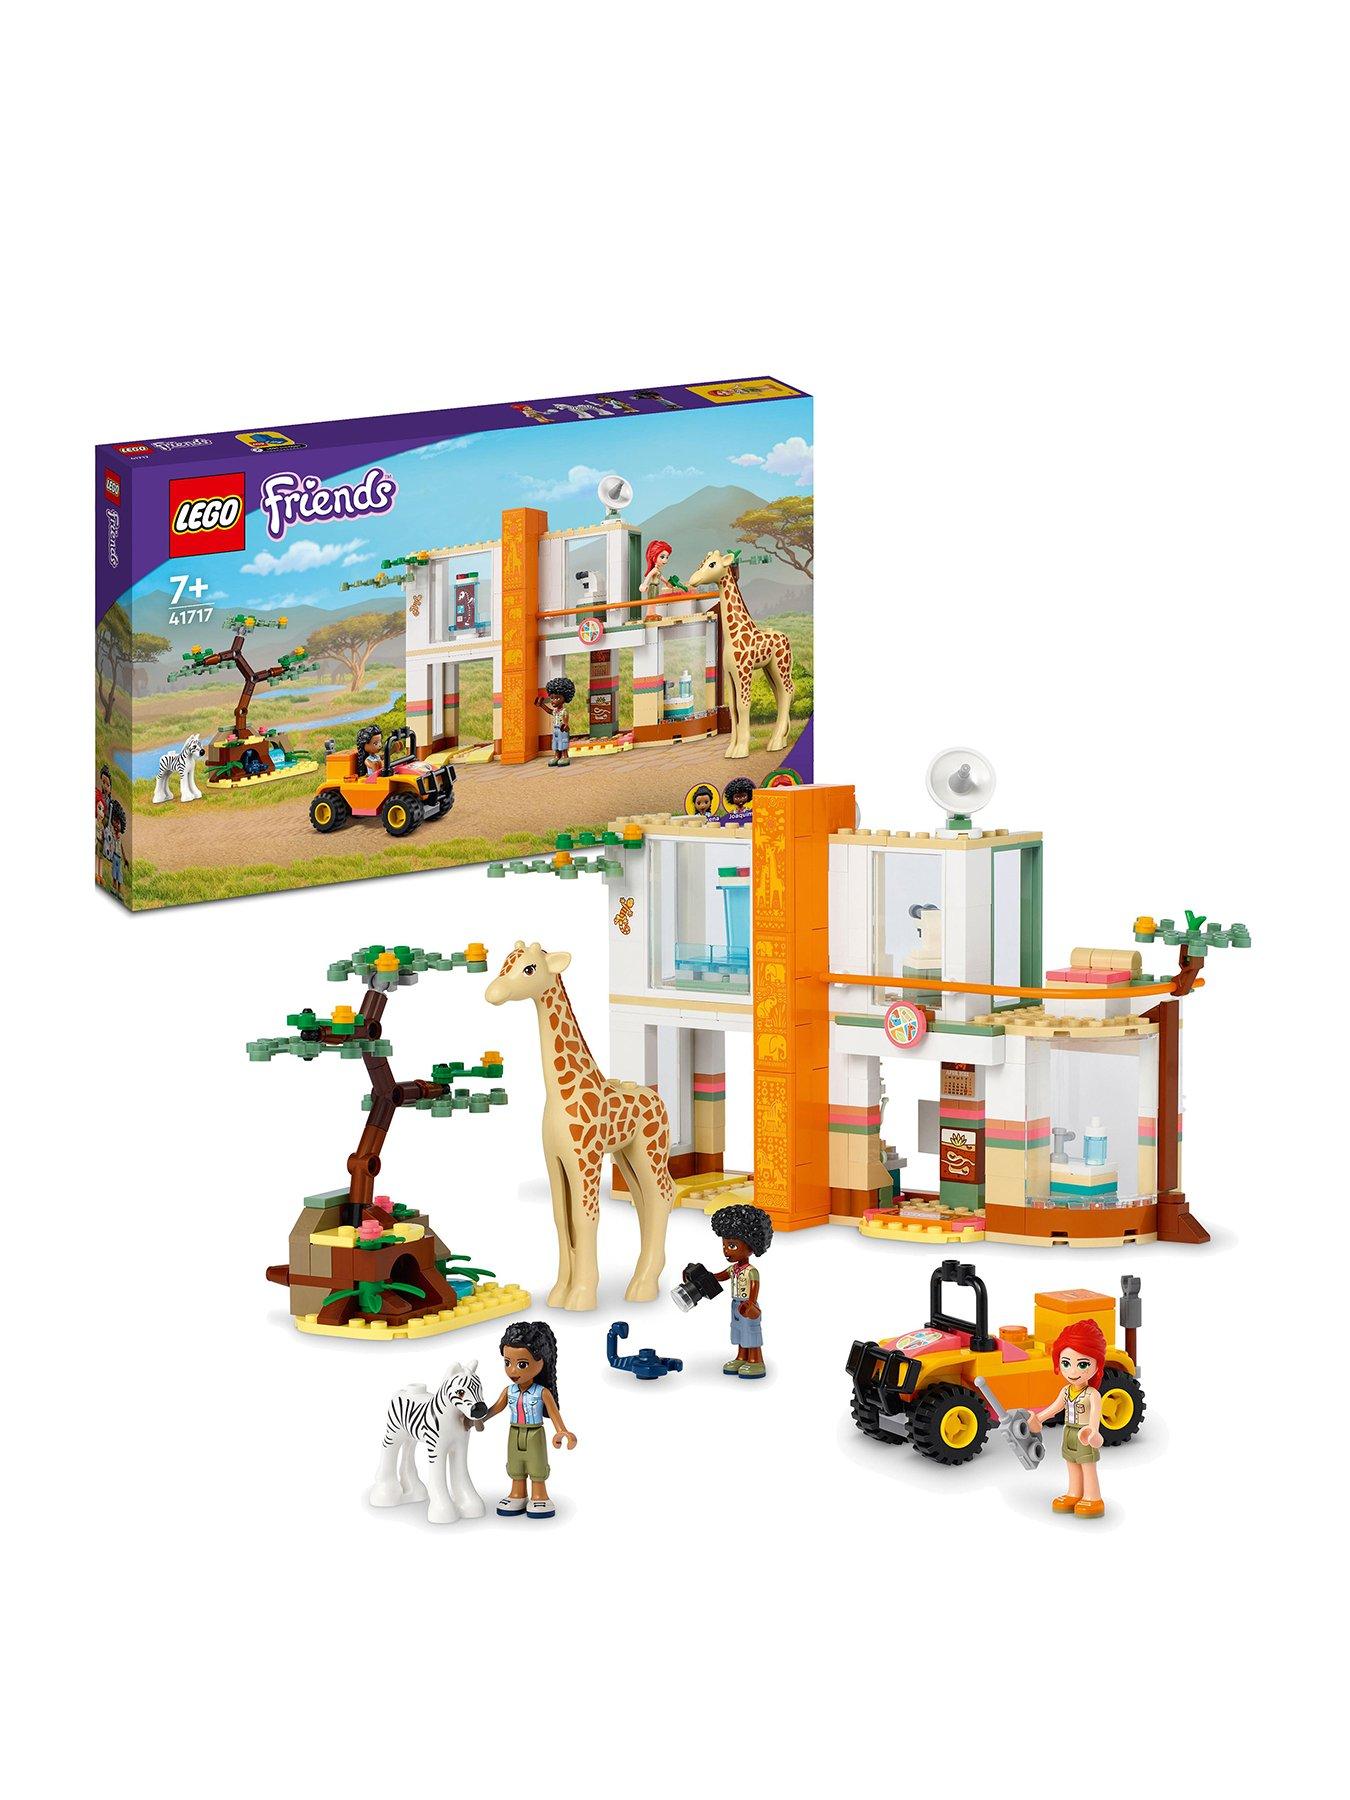 LEGO Friends | Playsets & Accessories | Very Ireland